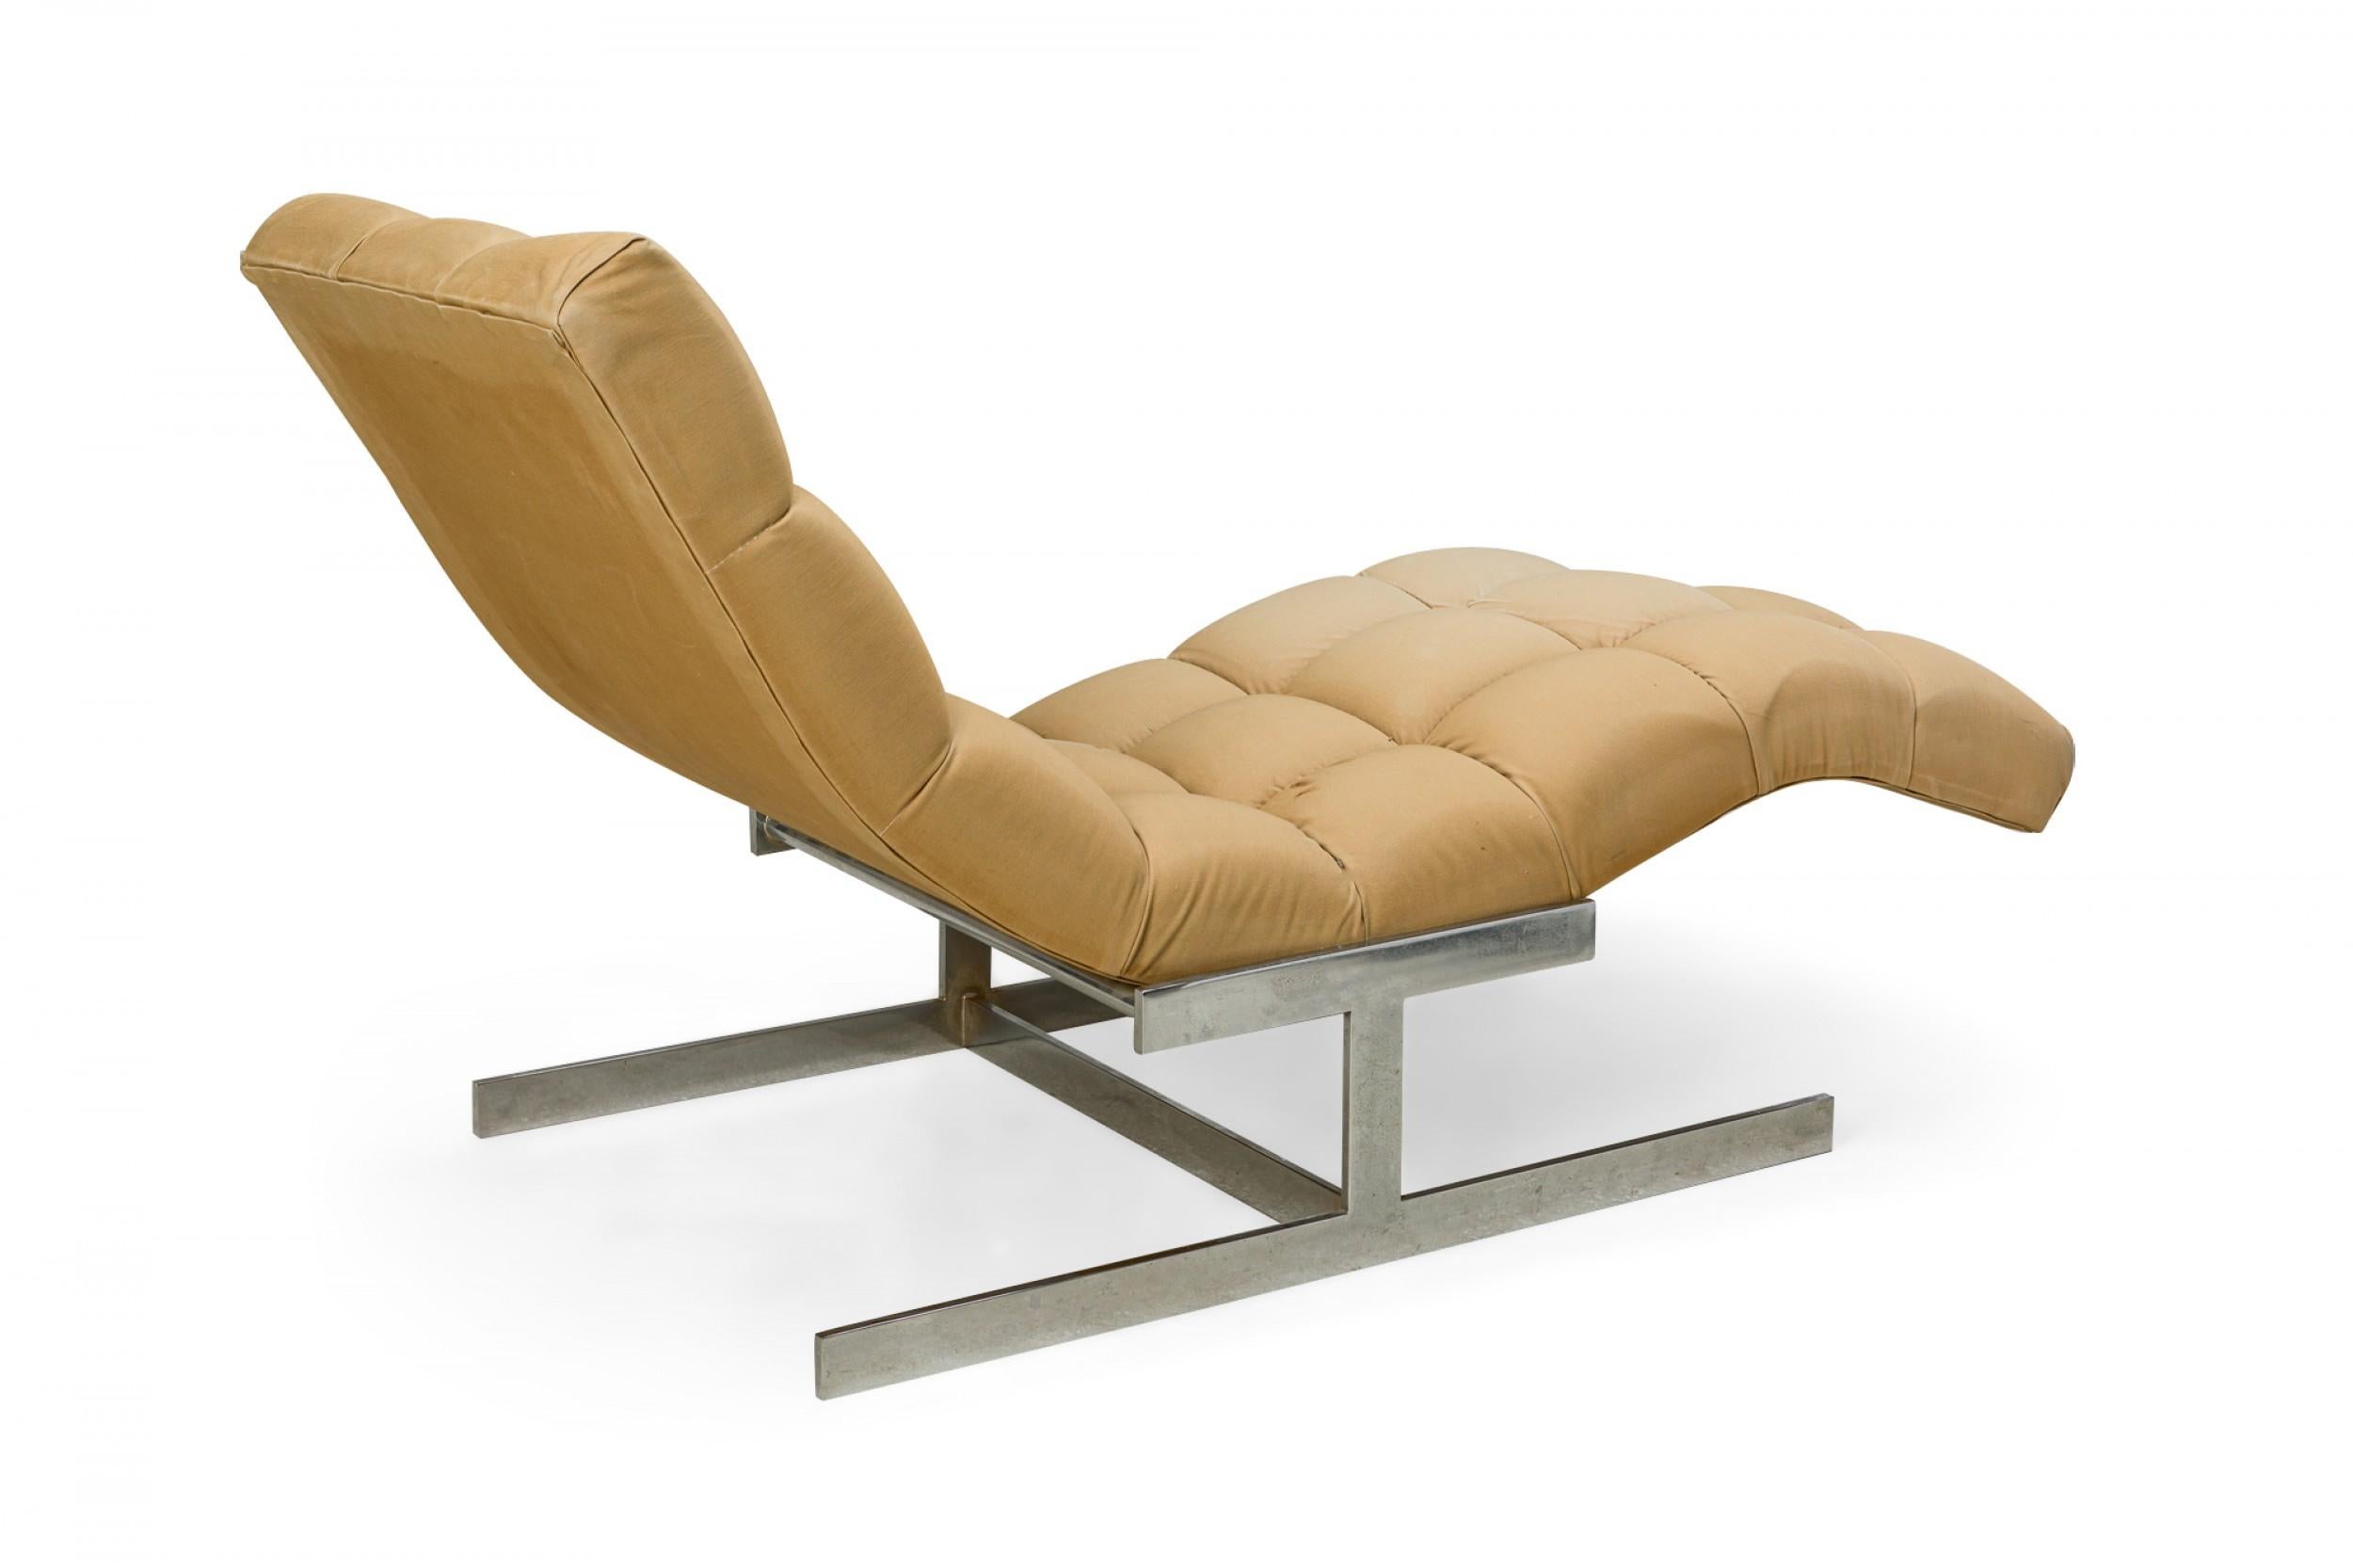 American Carsons Biscuit Beige Upholstery and Chrome 'Wave' Form Chaise Lounge For Sale